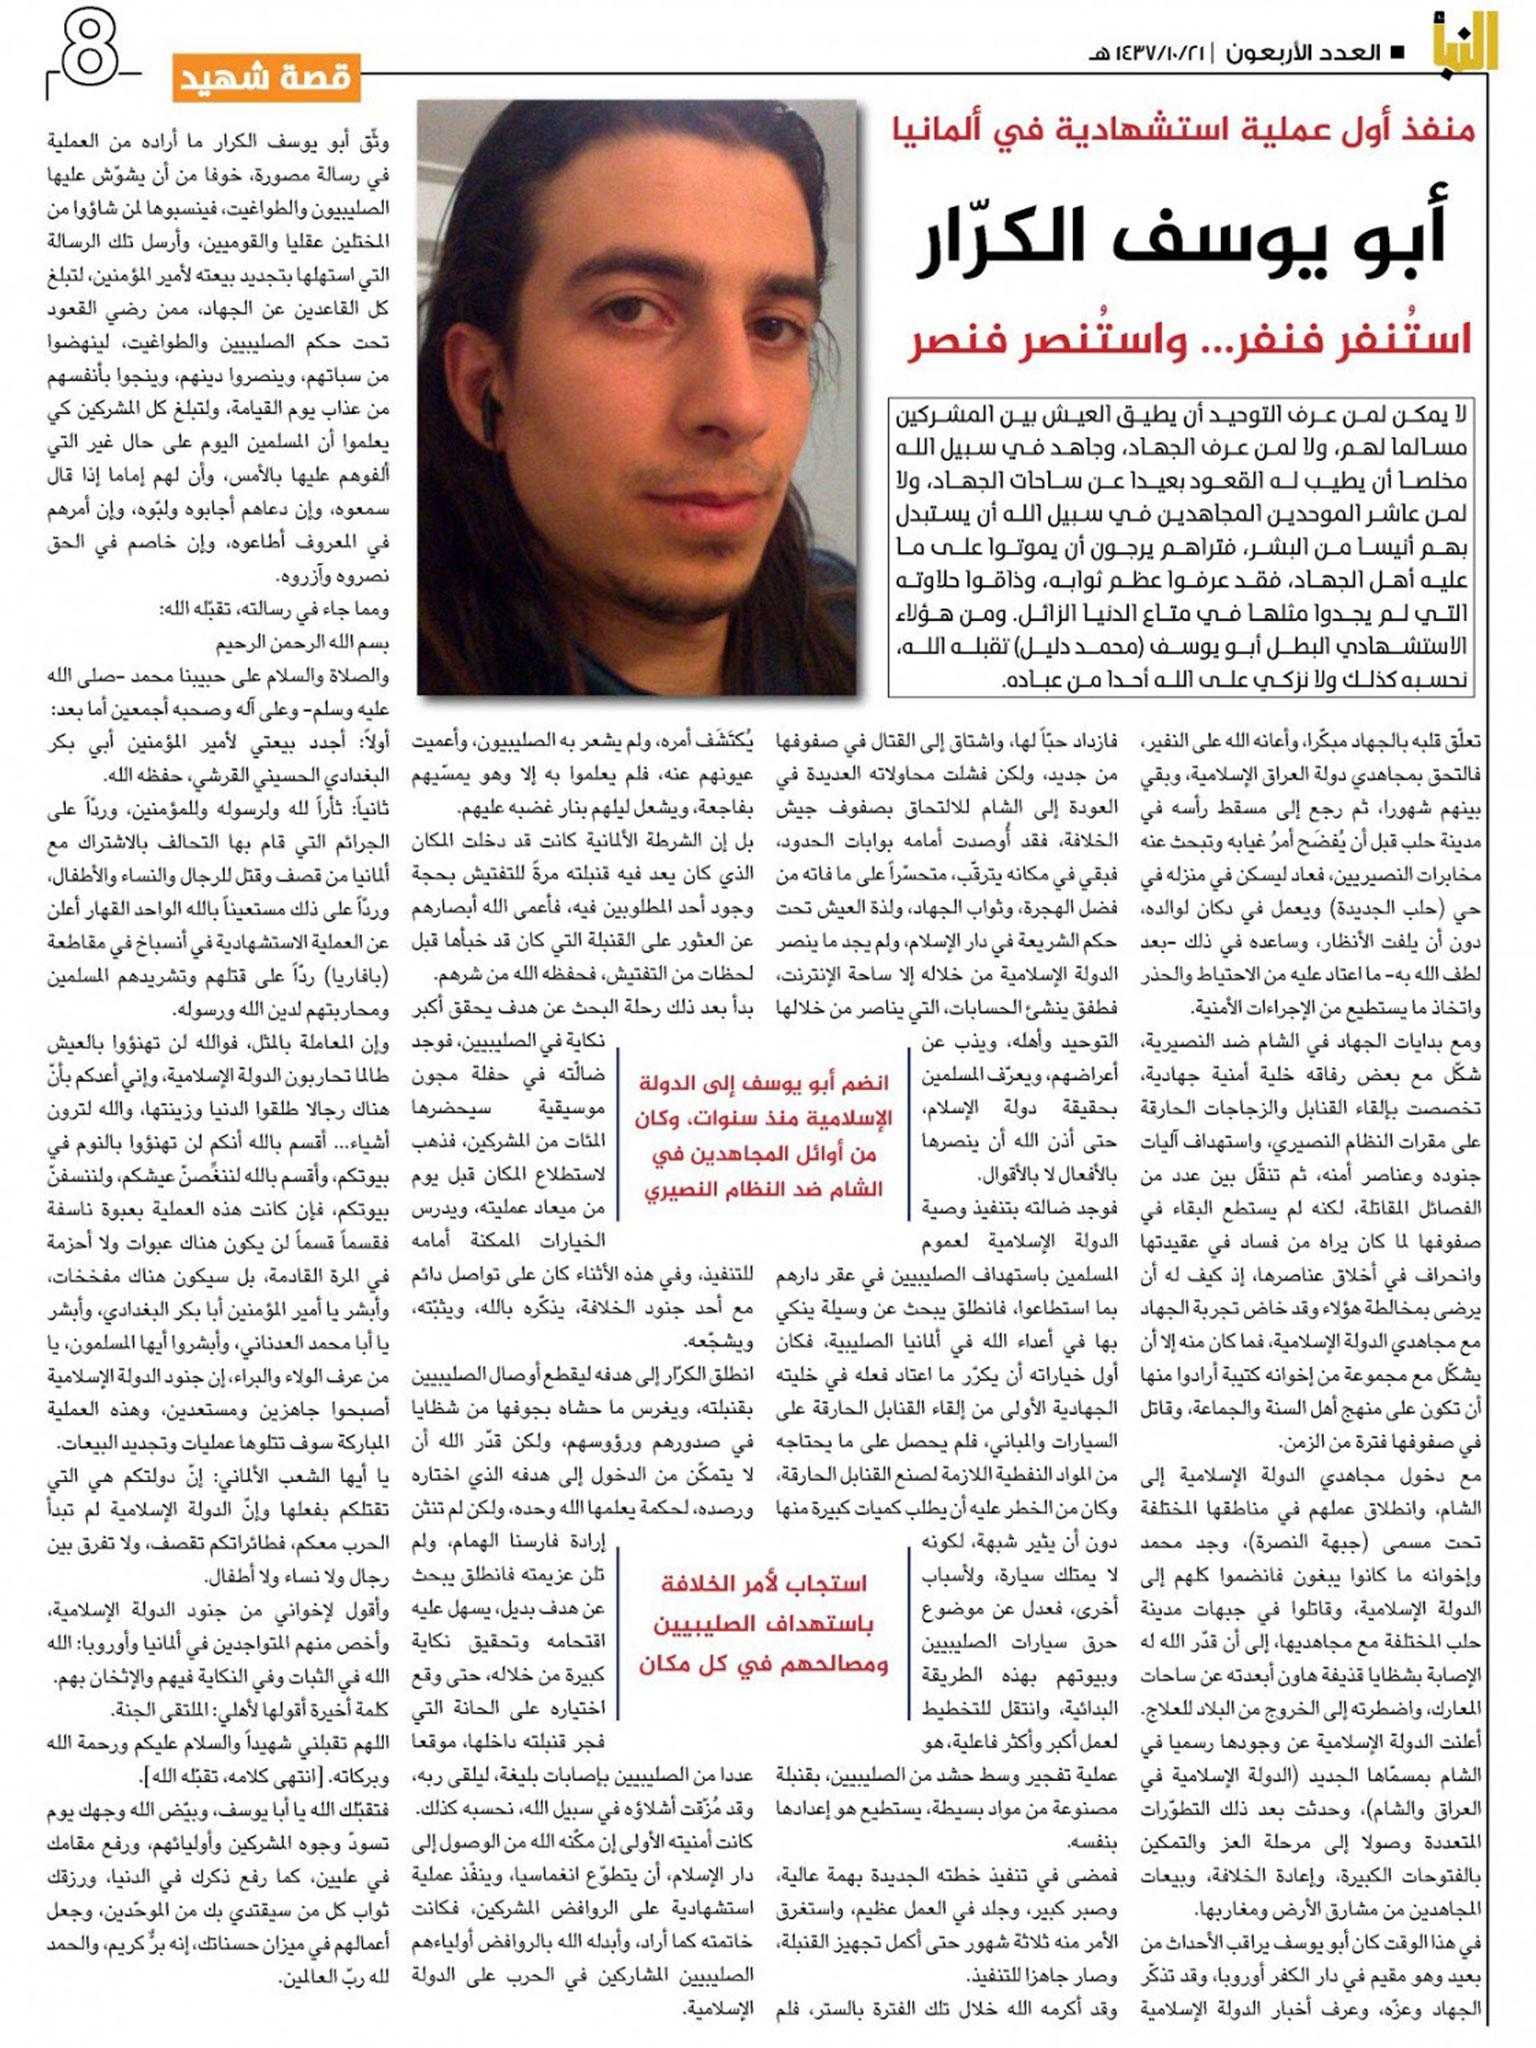 An article in the al-Nabaa online magazine, published late Thursday, claims Ansbach bomber Mohammad Daleel carried out attacks against Syrian government forces using hand grenades and Molotov cocktails before seeking asylum in Germany